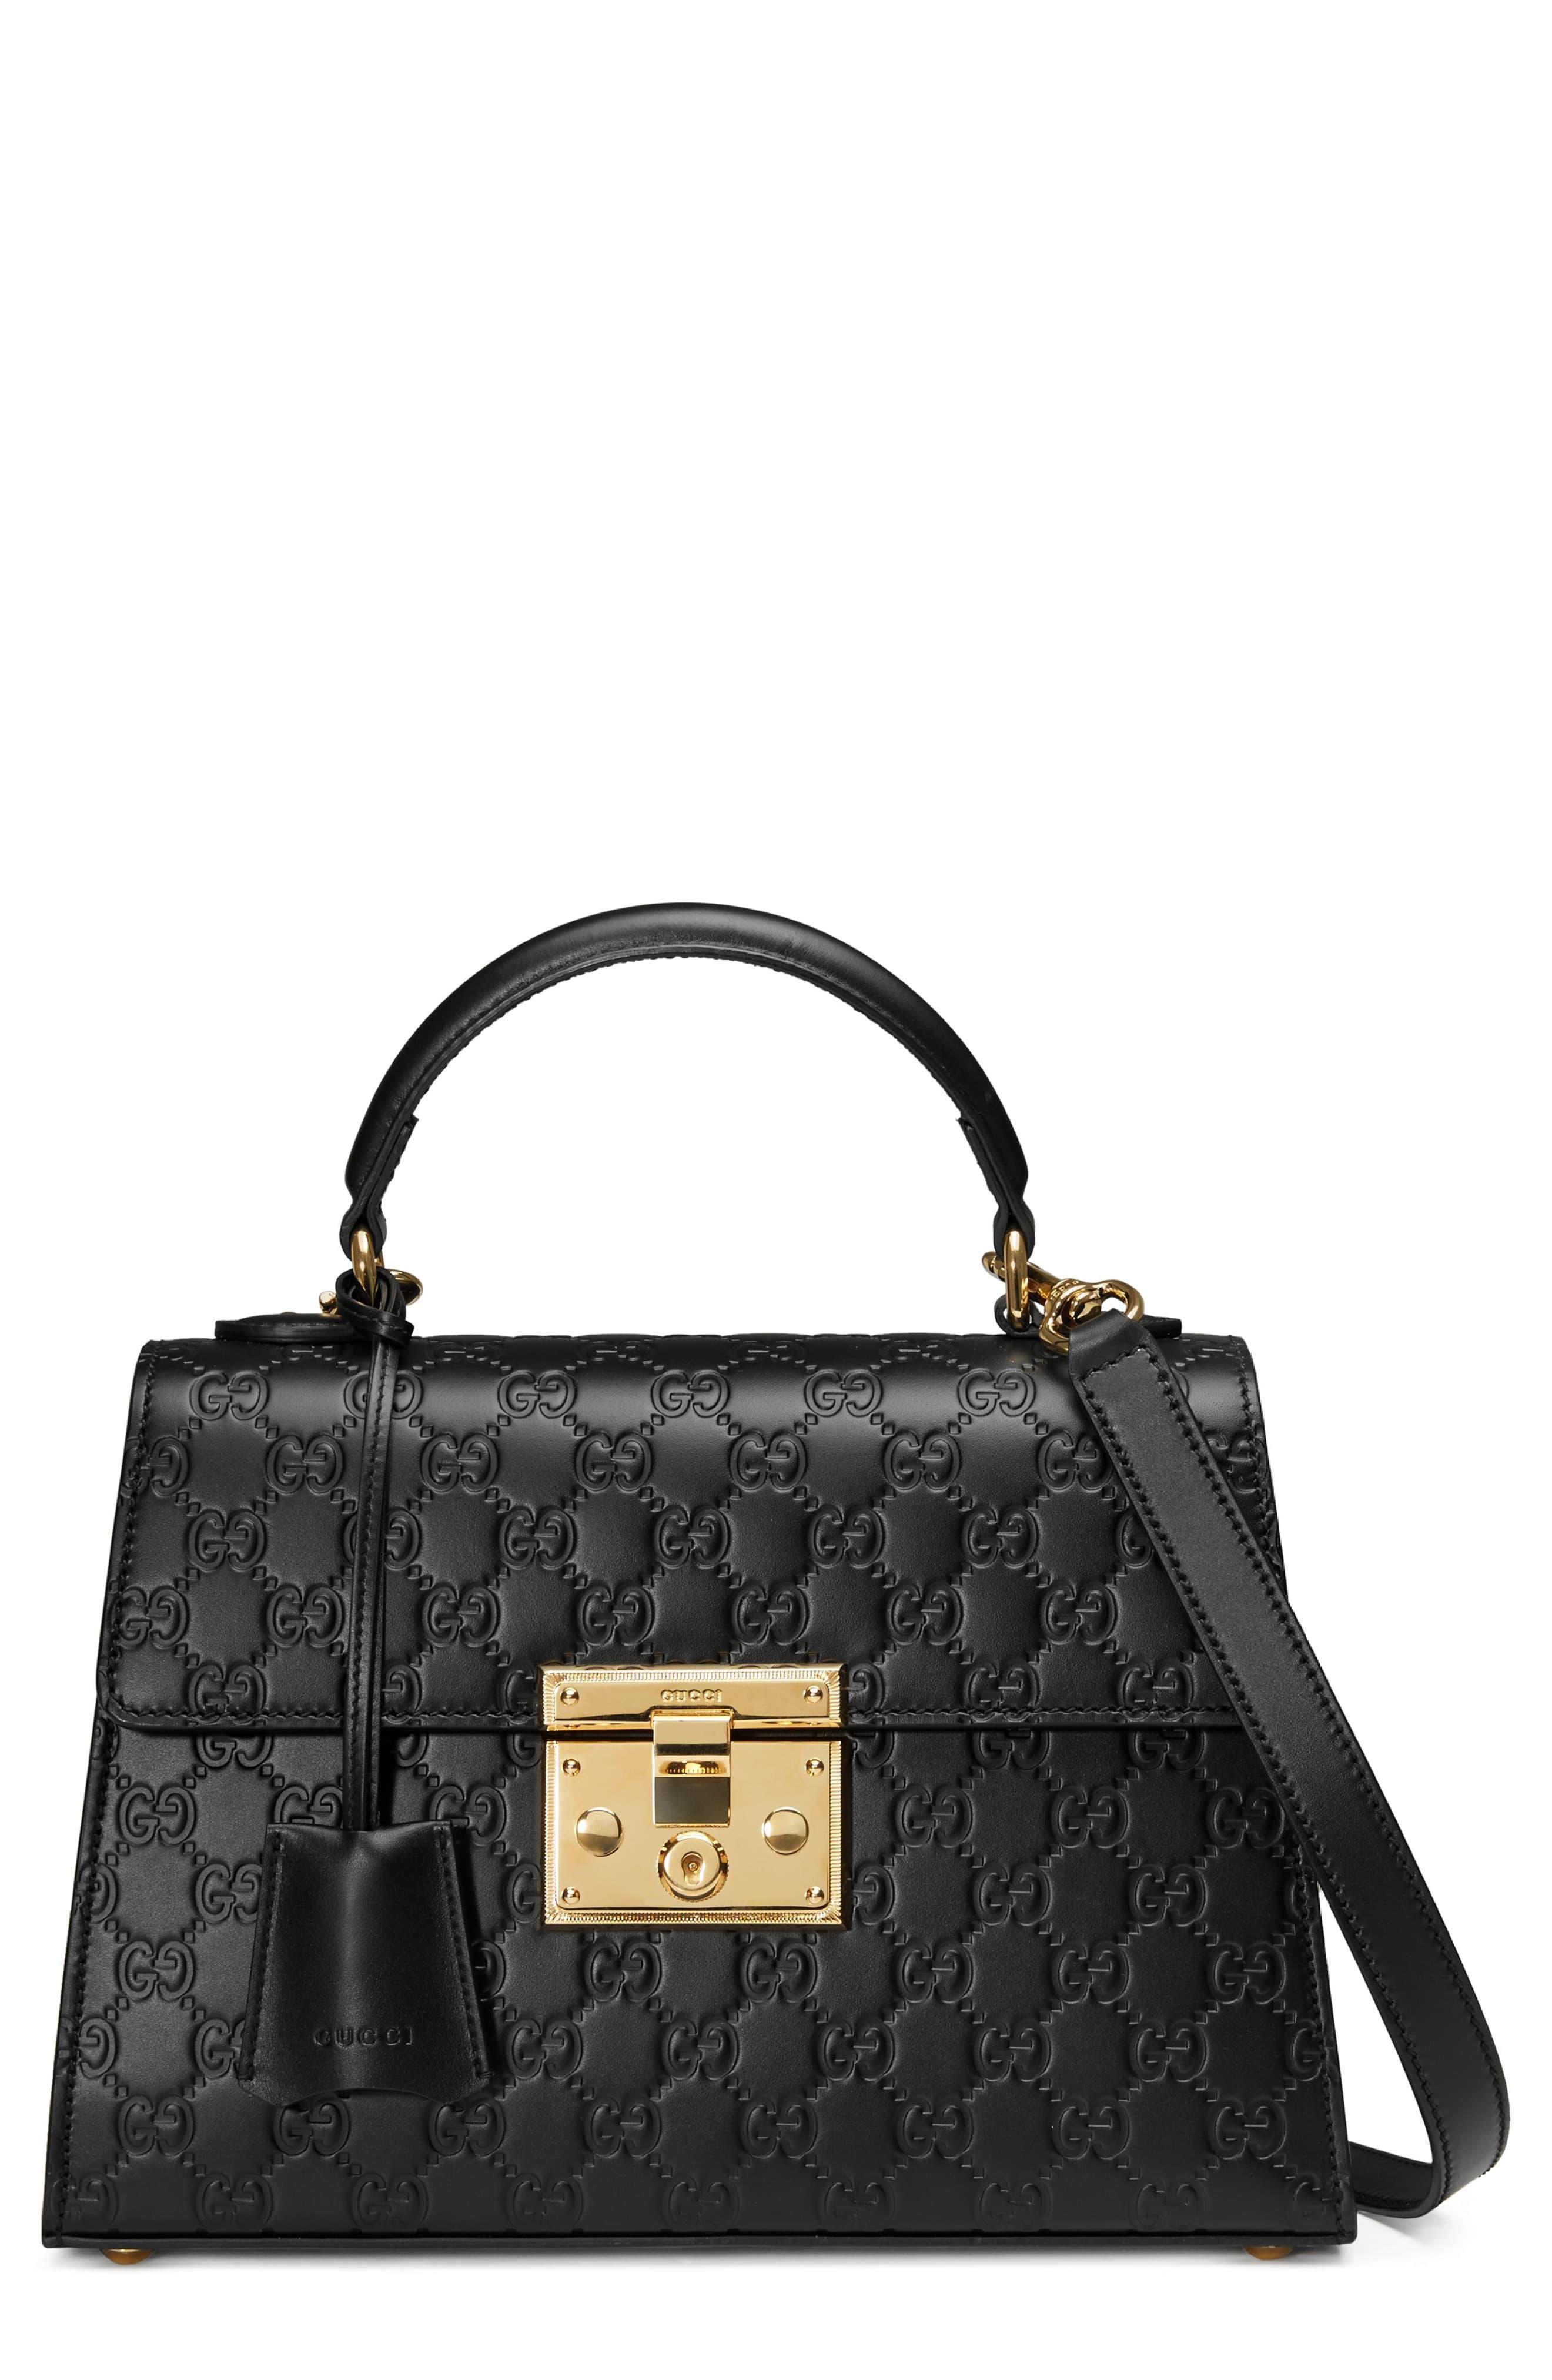 Gucci Small Padlock Top Handle Signature Leather Bag in Nero (Black) - Lyst